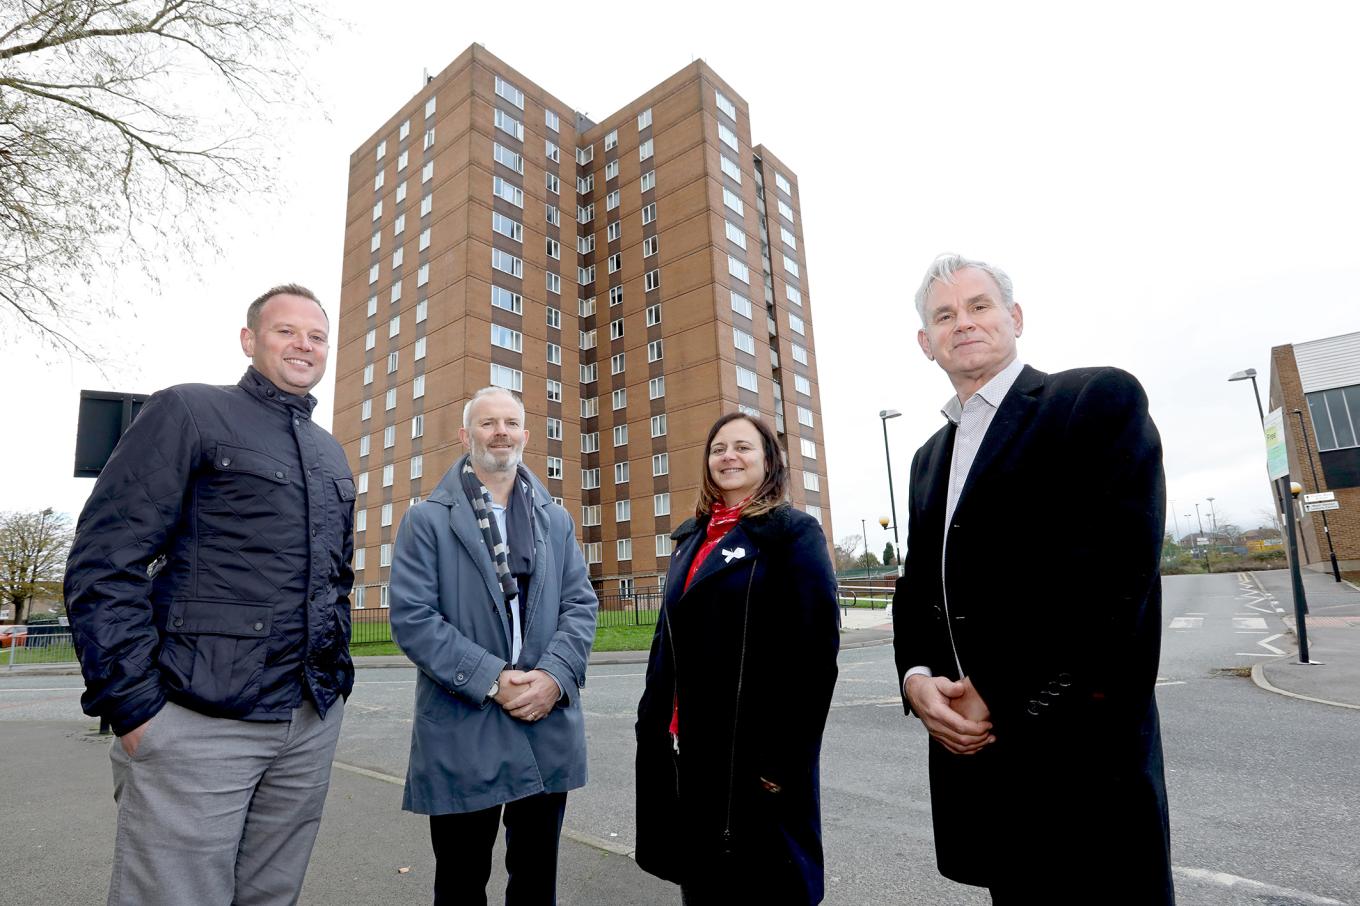 Key stakeholders stood in front of tower block in the West Denton area of Newcastle,